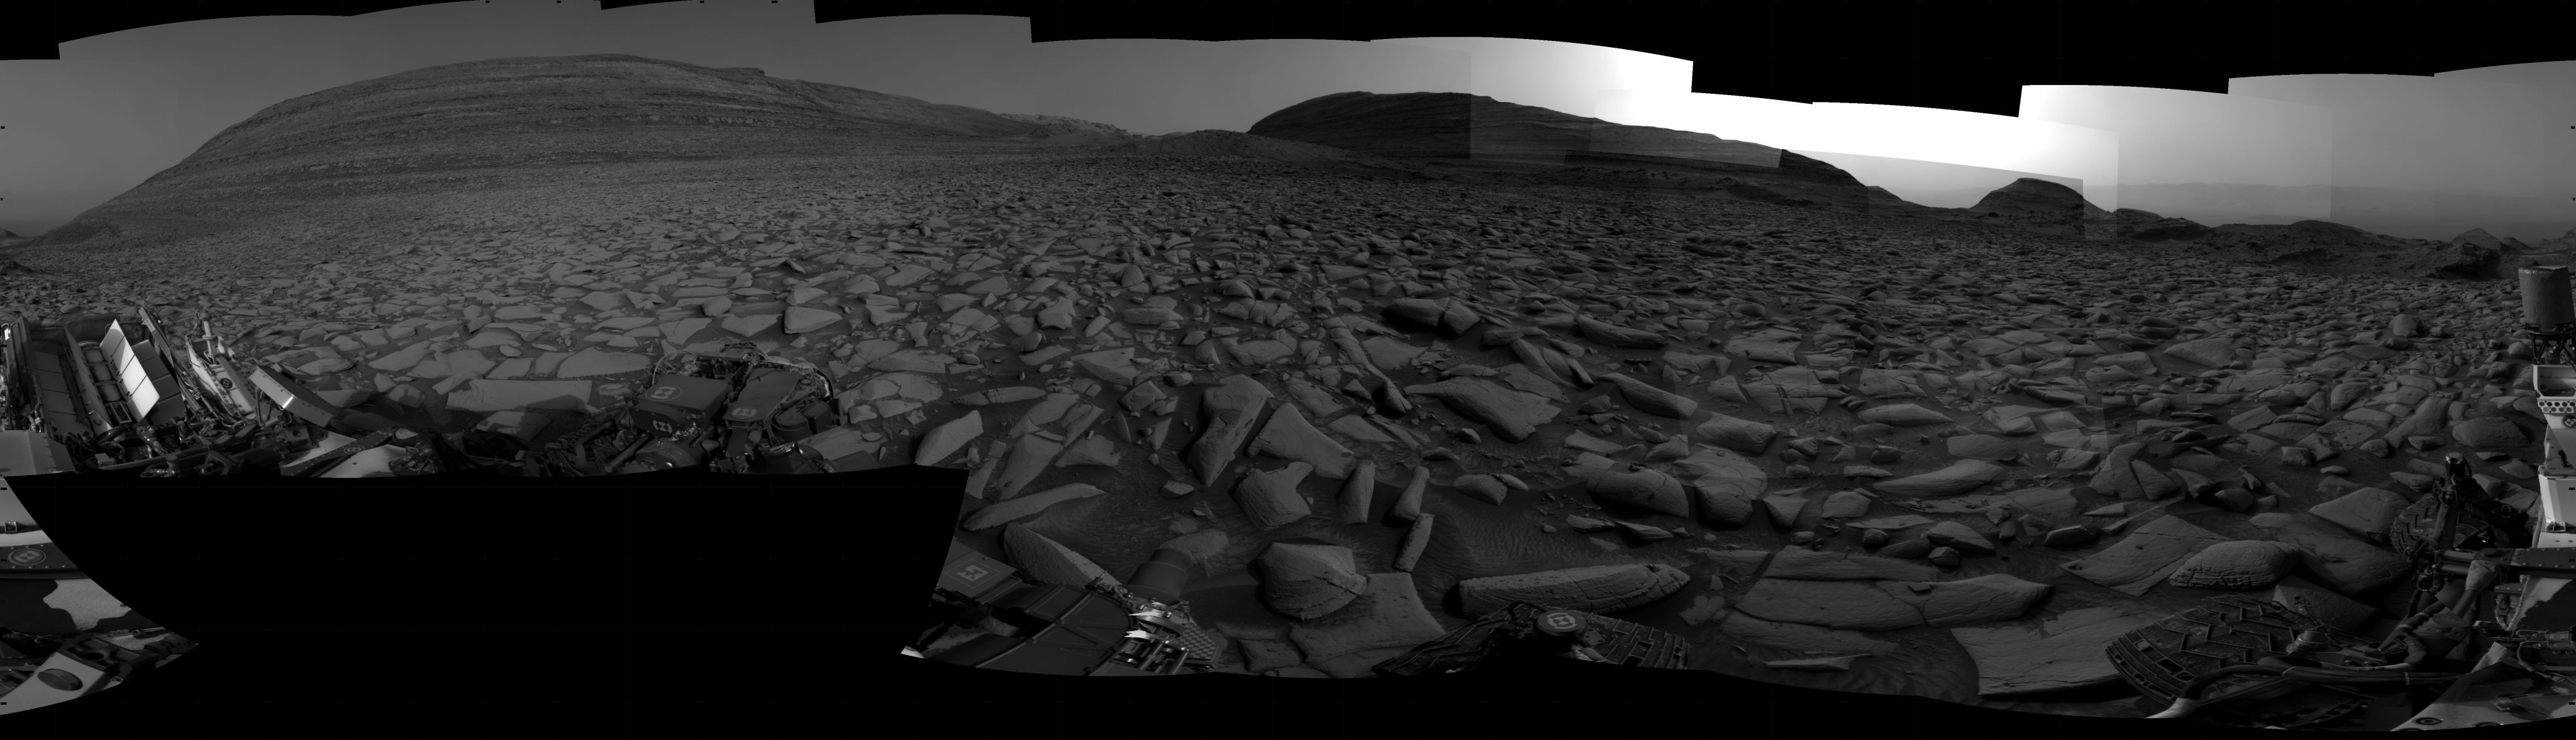 Curiosity took the images on April 05, 2024, Sol 4146 of the Mars Science Laboratory mission at drive 1858, site number 106. The local mean solar time for the image exposures was 3 PM.